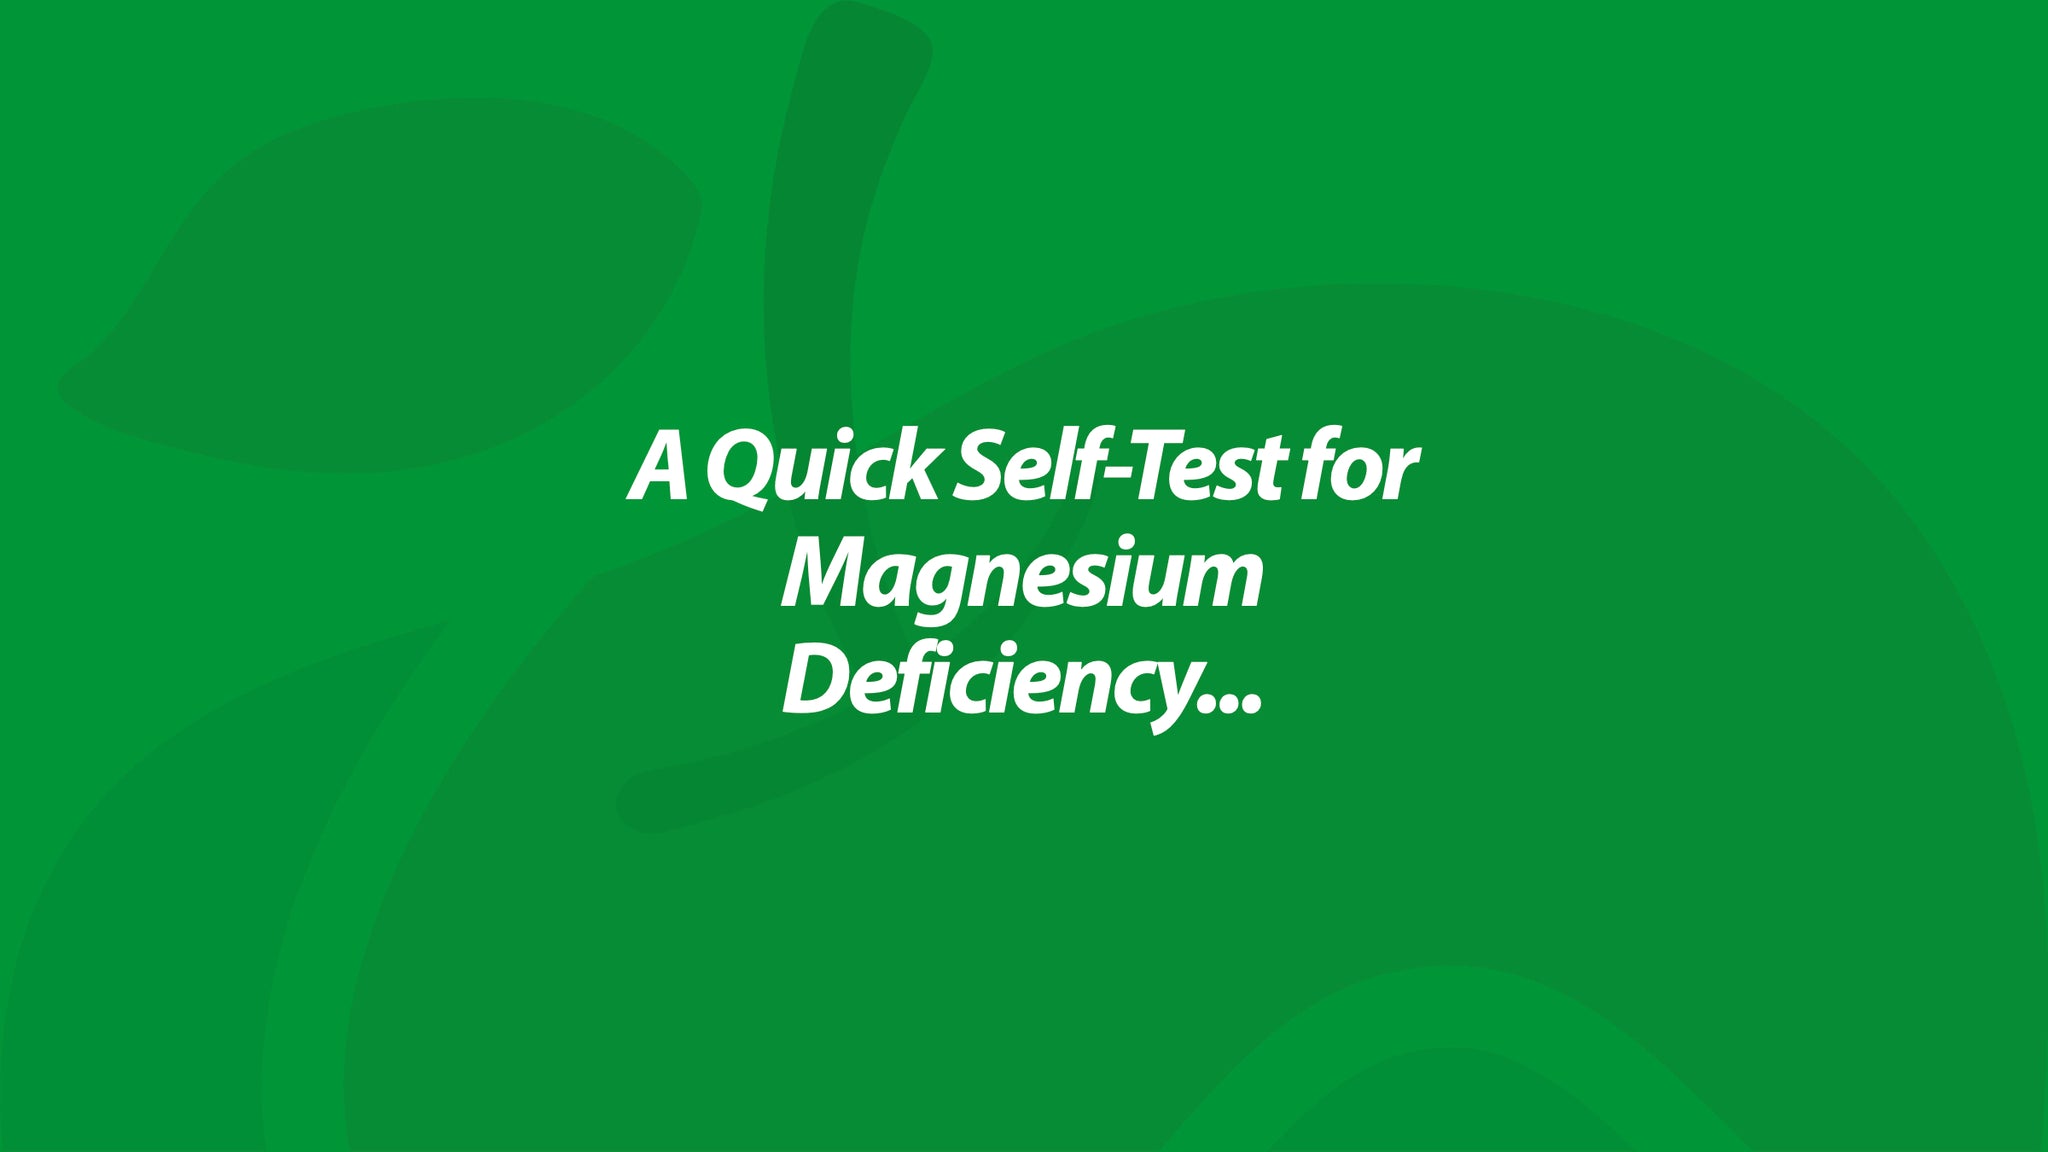 A Quick Self-Test for Magnesium Deficiency...